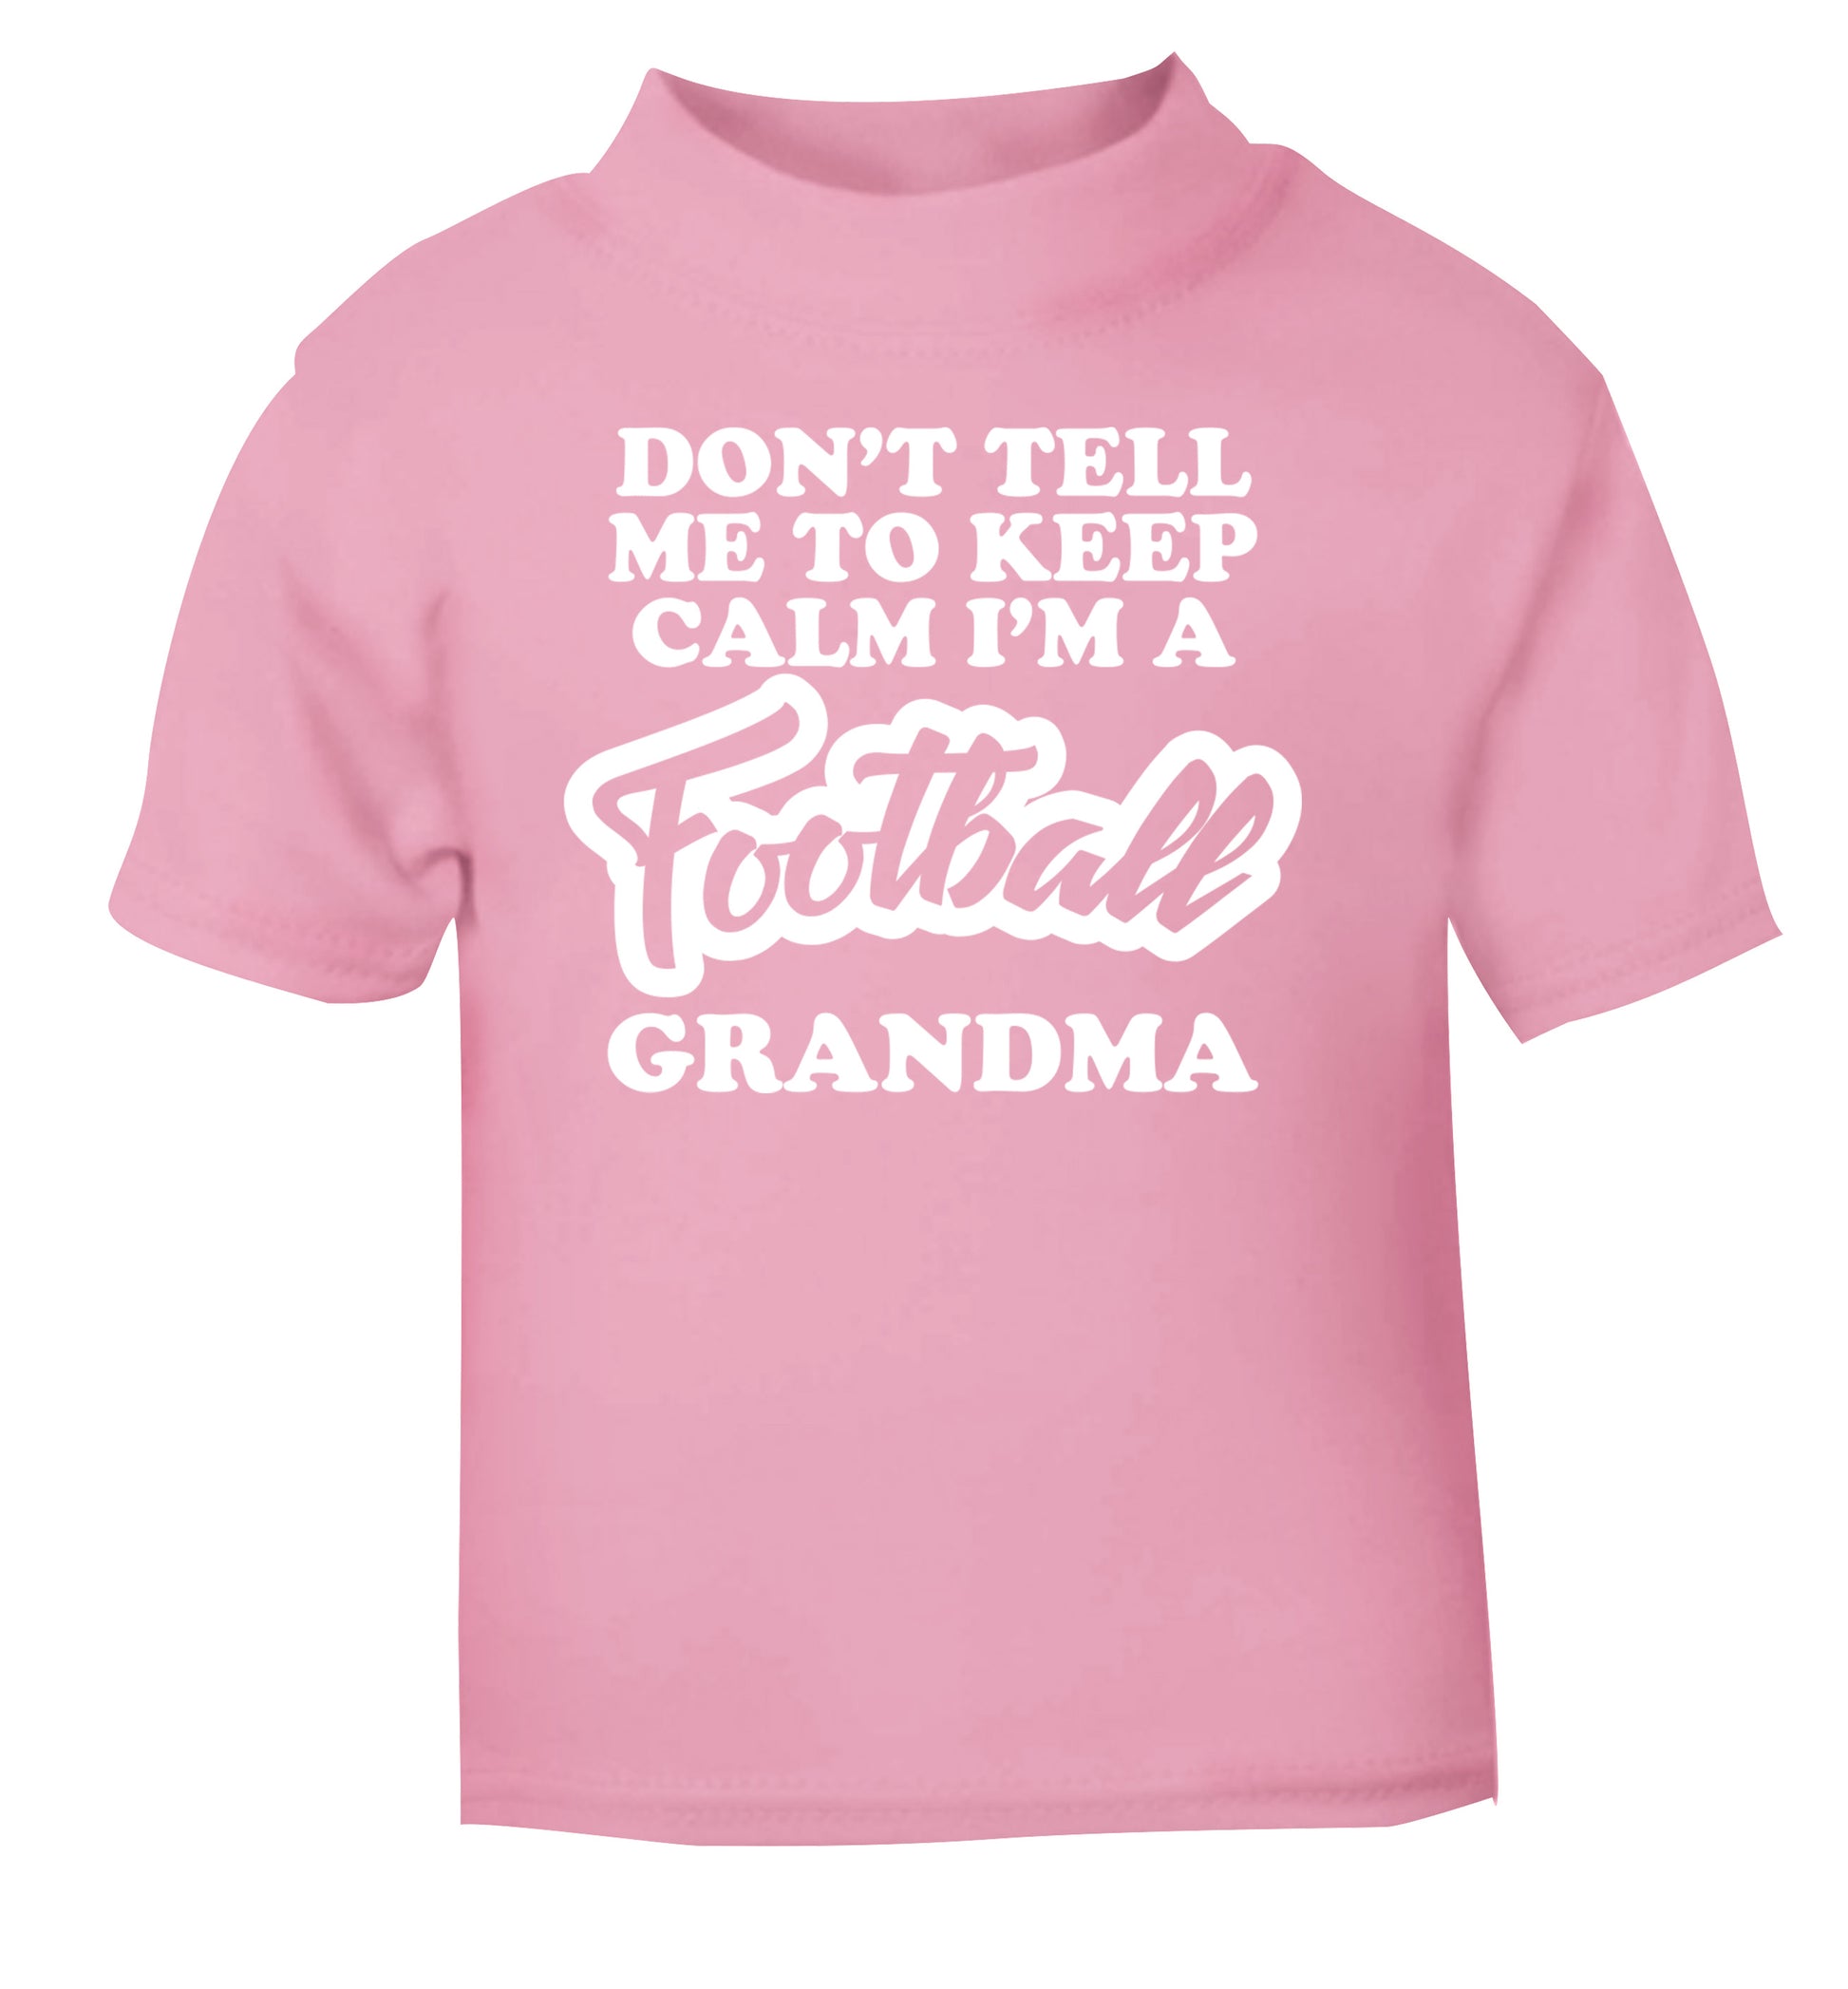 Don't tell me to keep calm I'm a football grandma light pink Baby Toddler Tshirt 2 Years